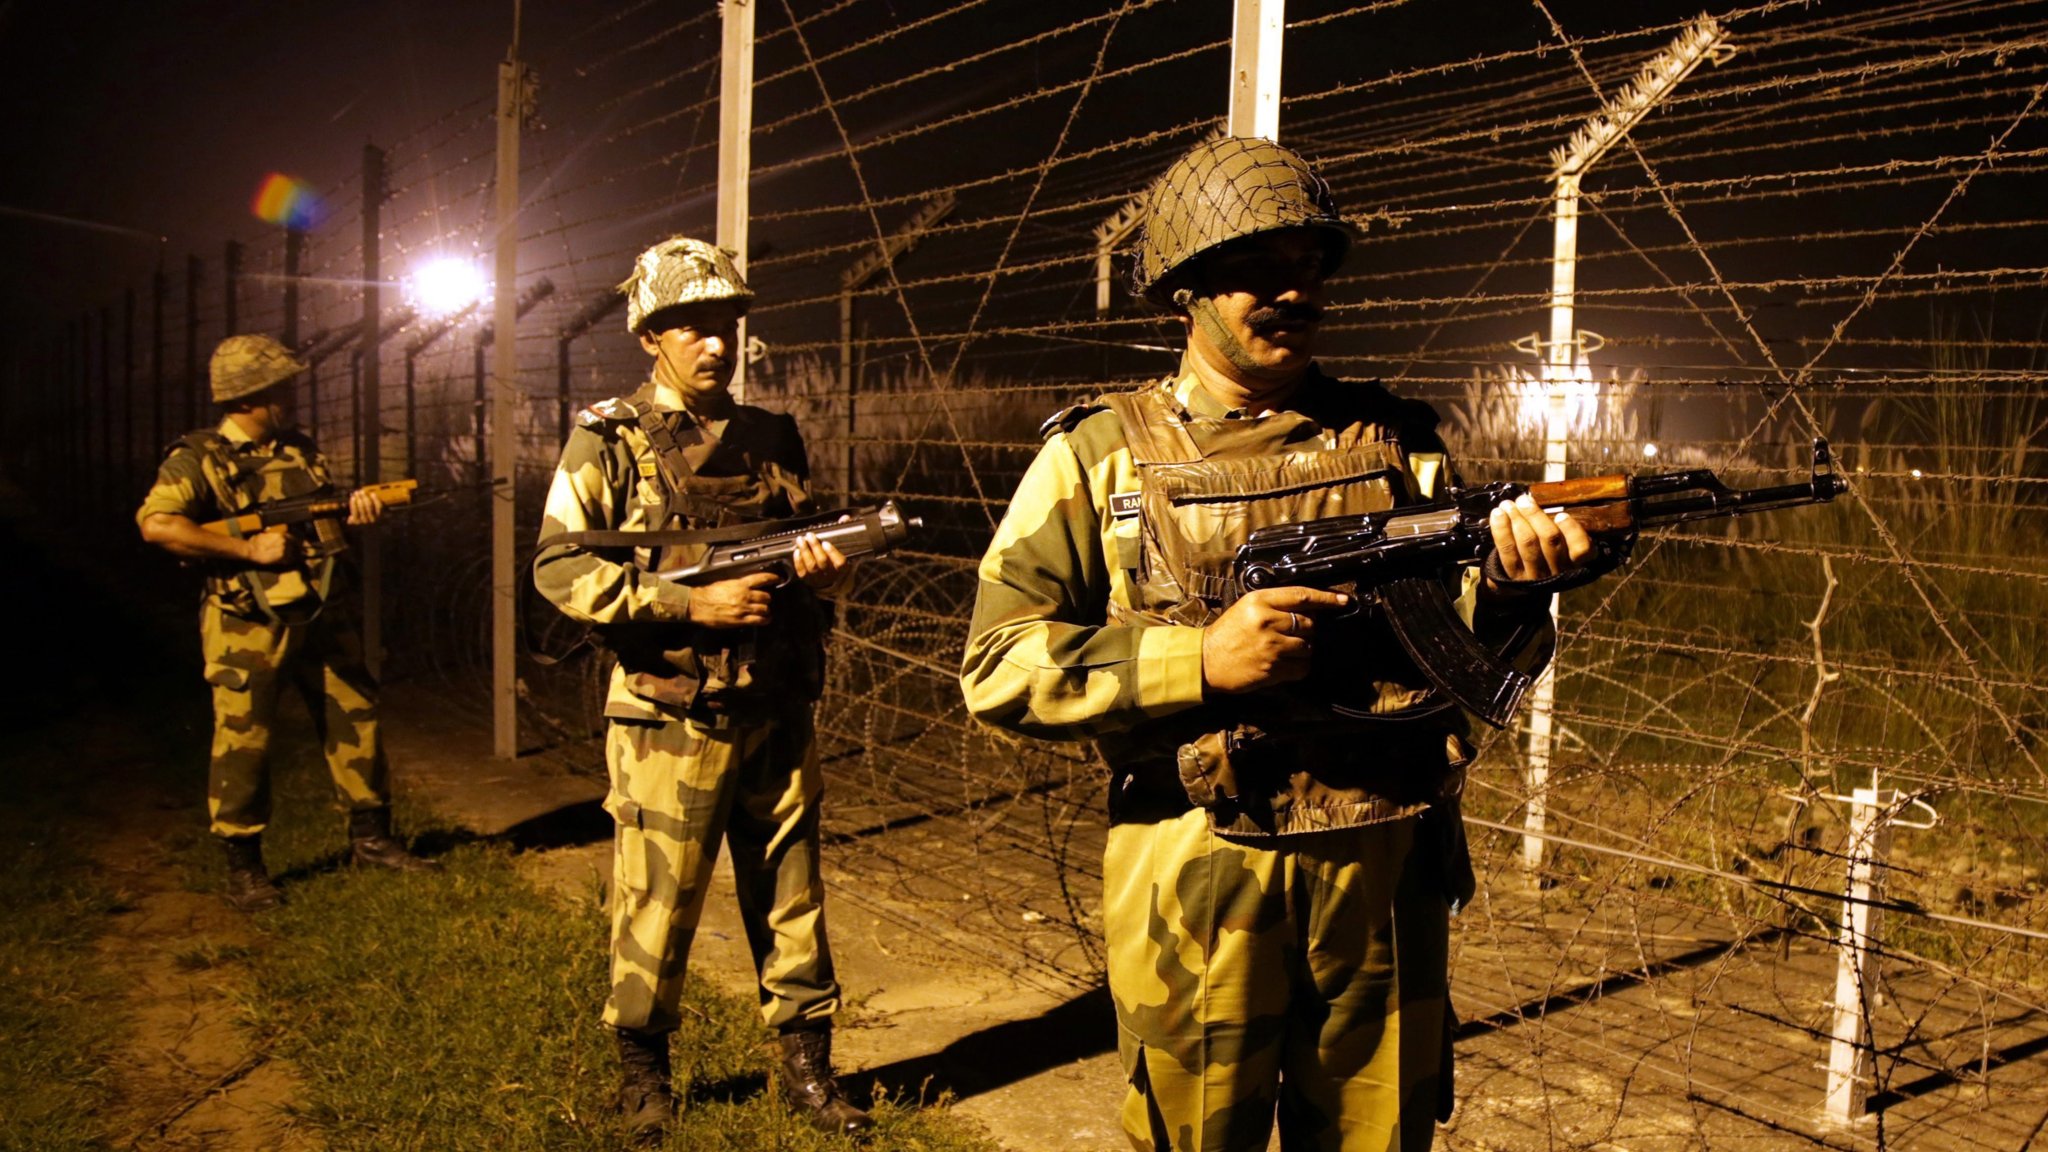 Indian Soldiers On Border - HD Wallpaper 